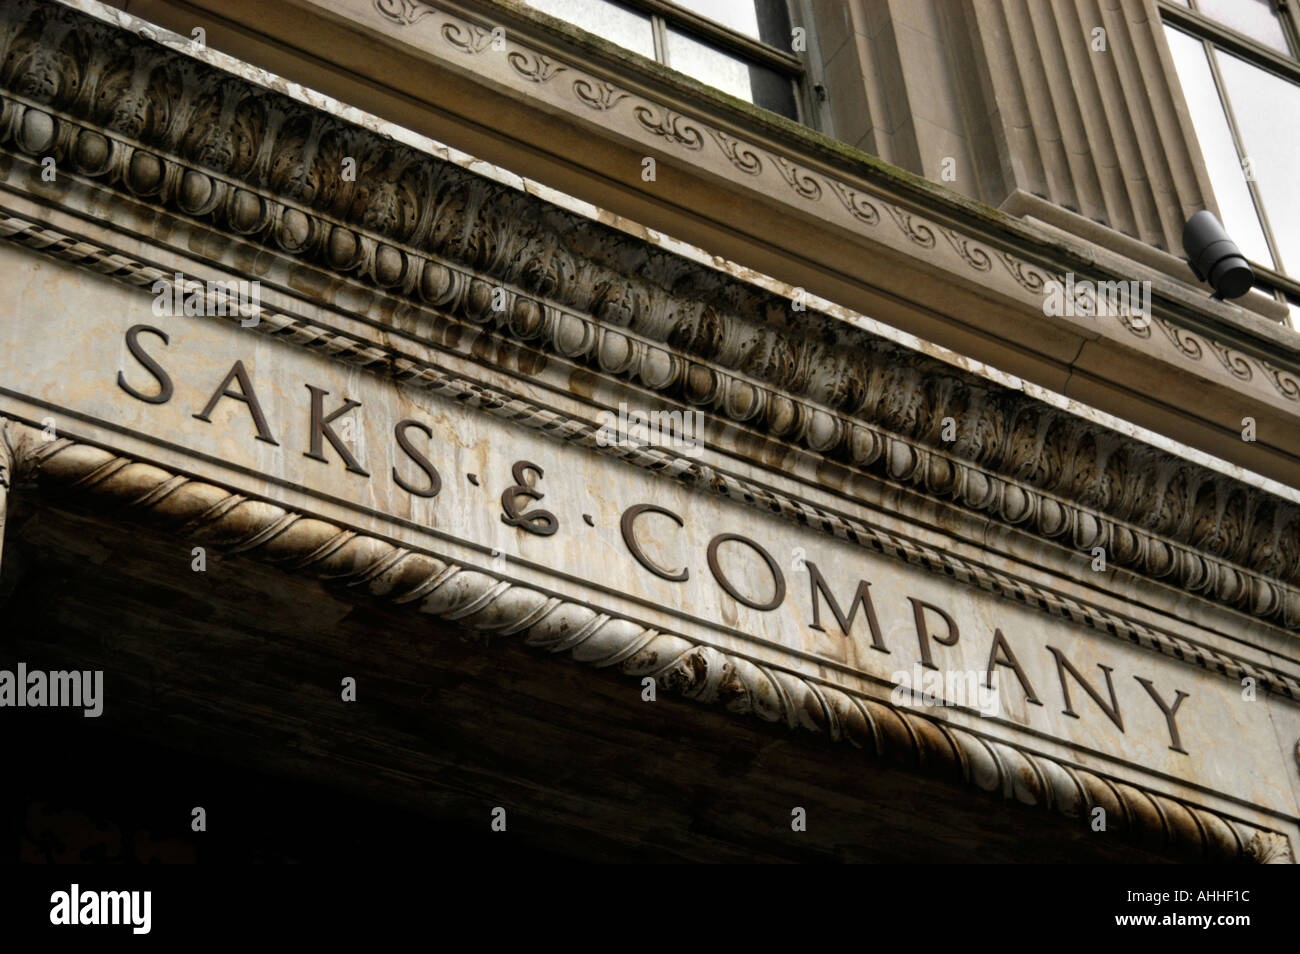 Saks Off 5th clothing site valued at $1 billion in spinoff from stores